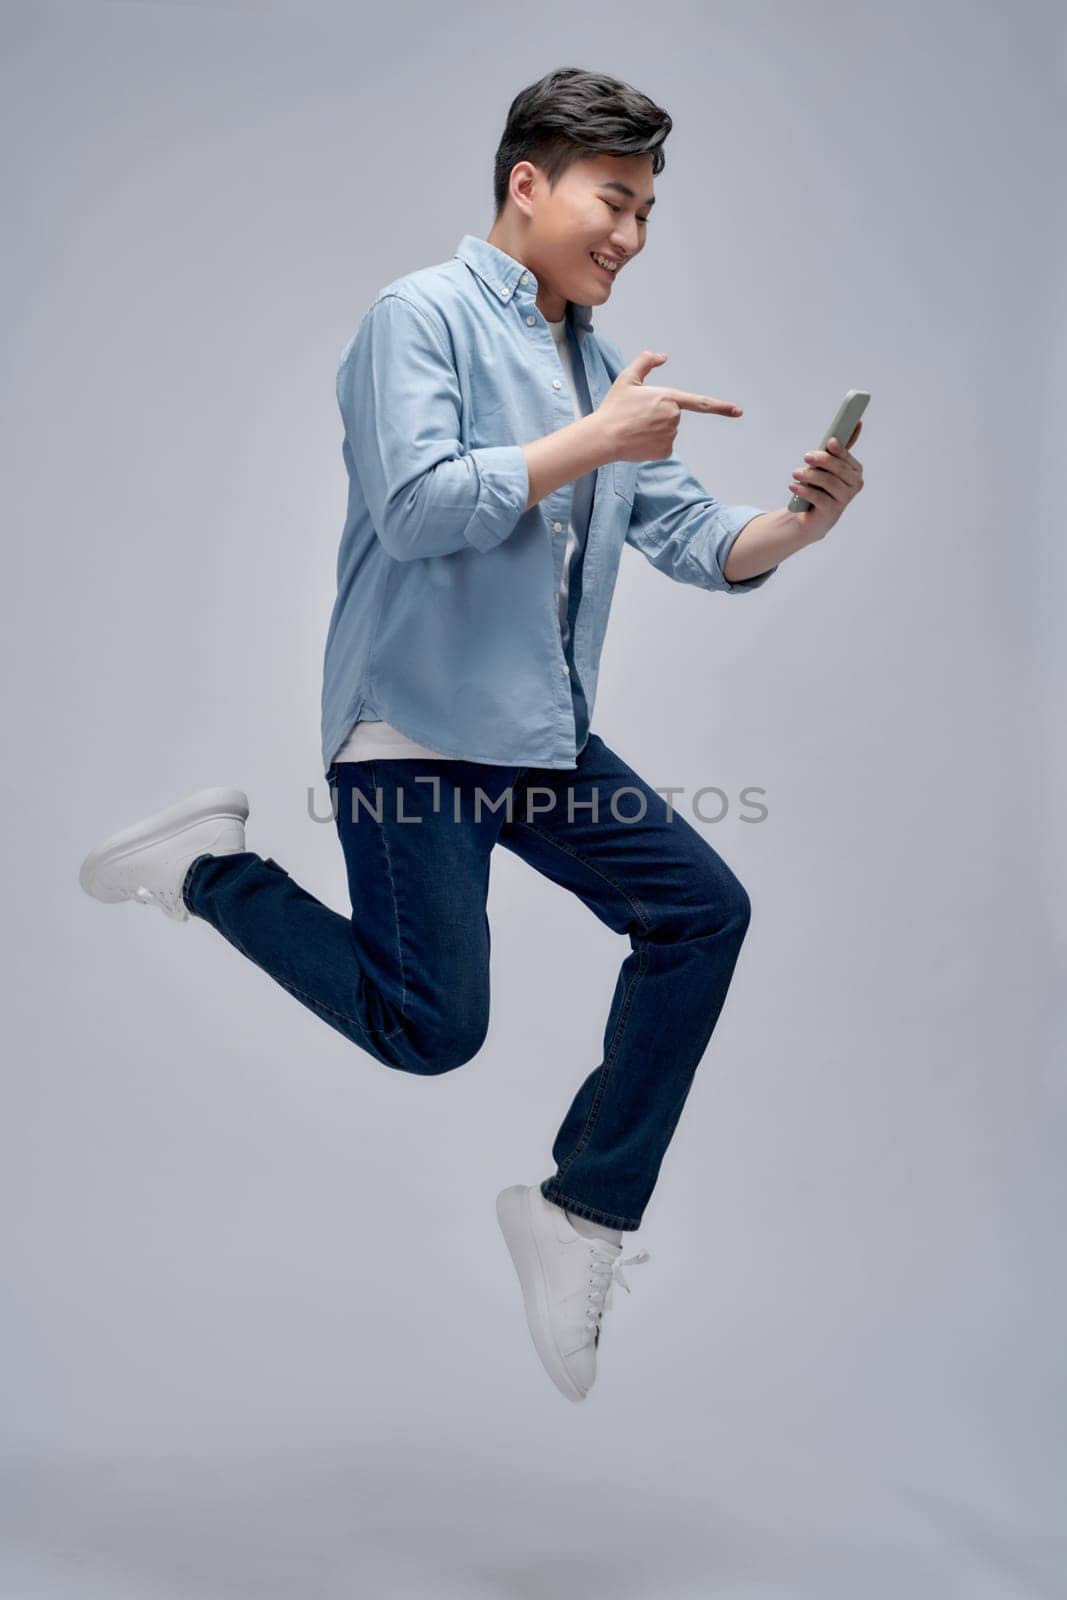 Excited man holding and pointing finger at his cell phone while jumping 